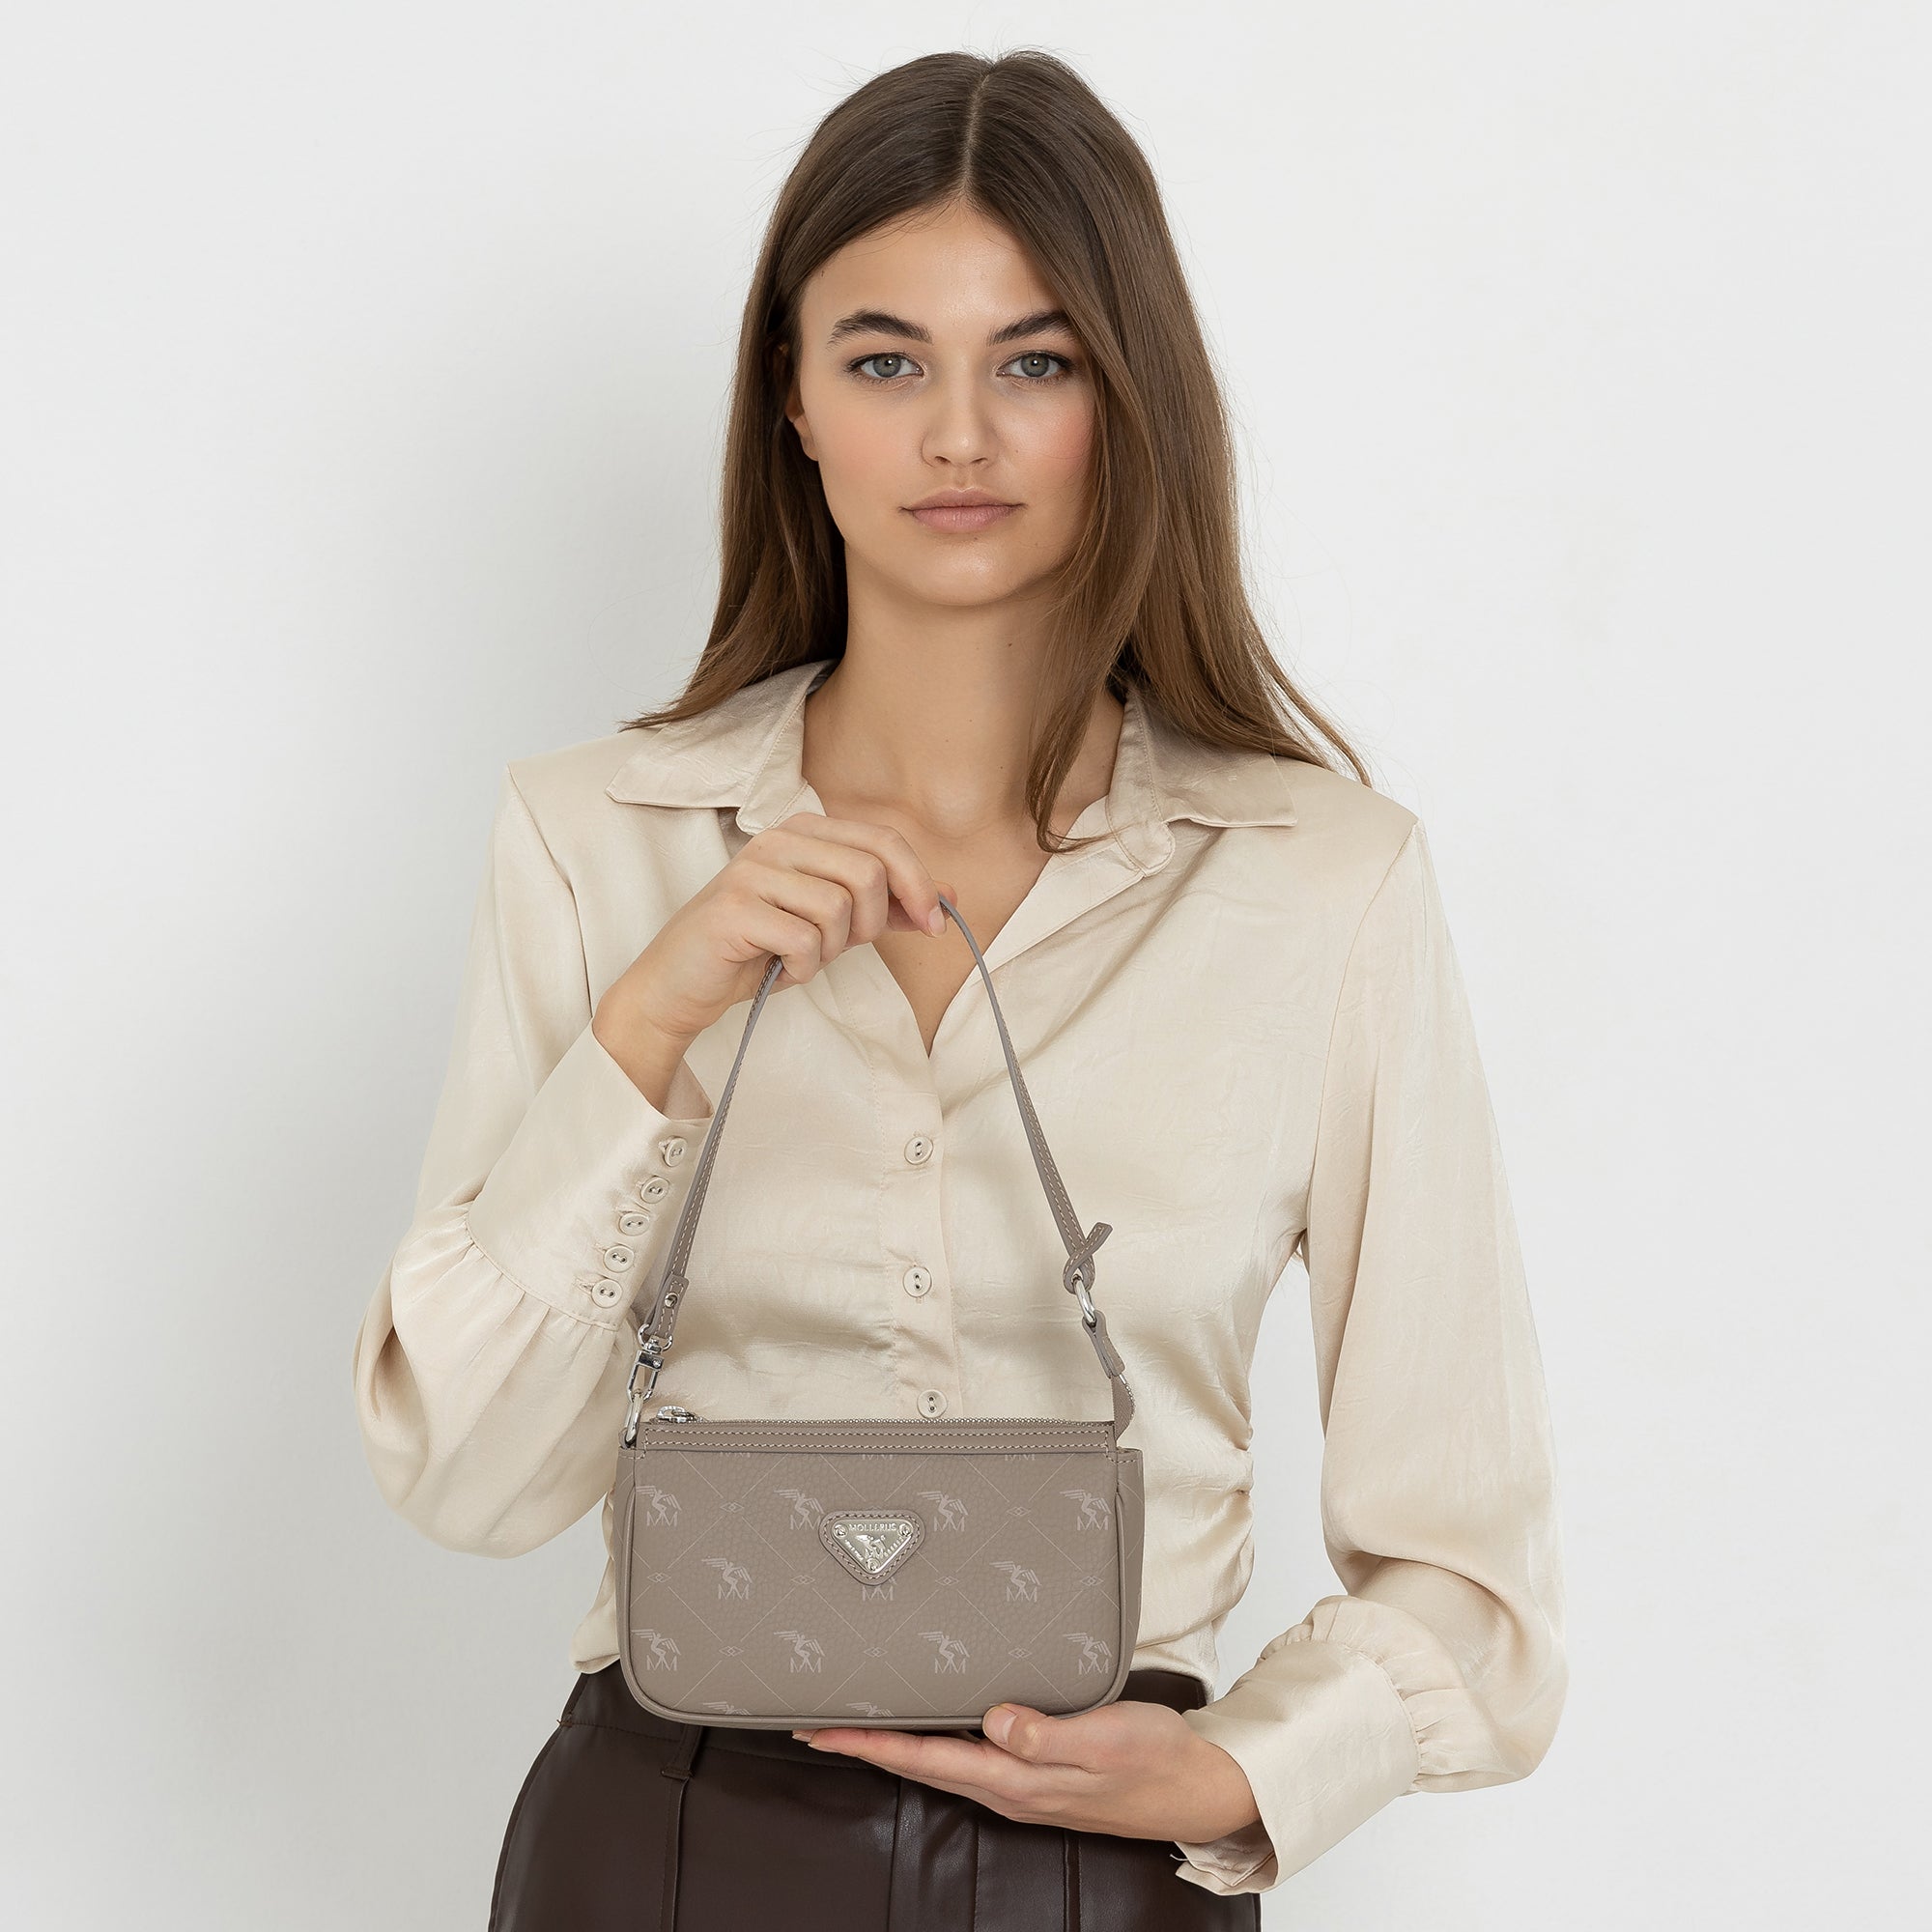 MISSY | Schultertasche Pecarus taupe/rosè/silber - frontal